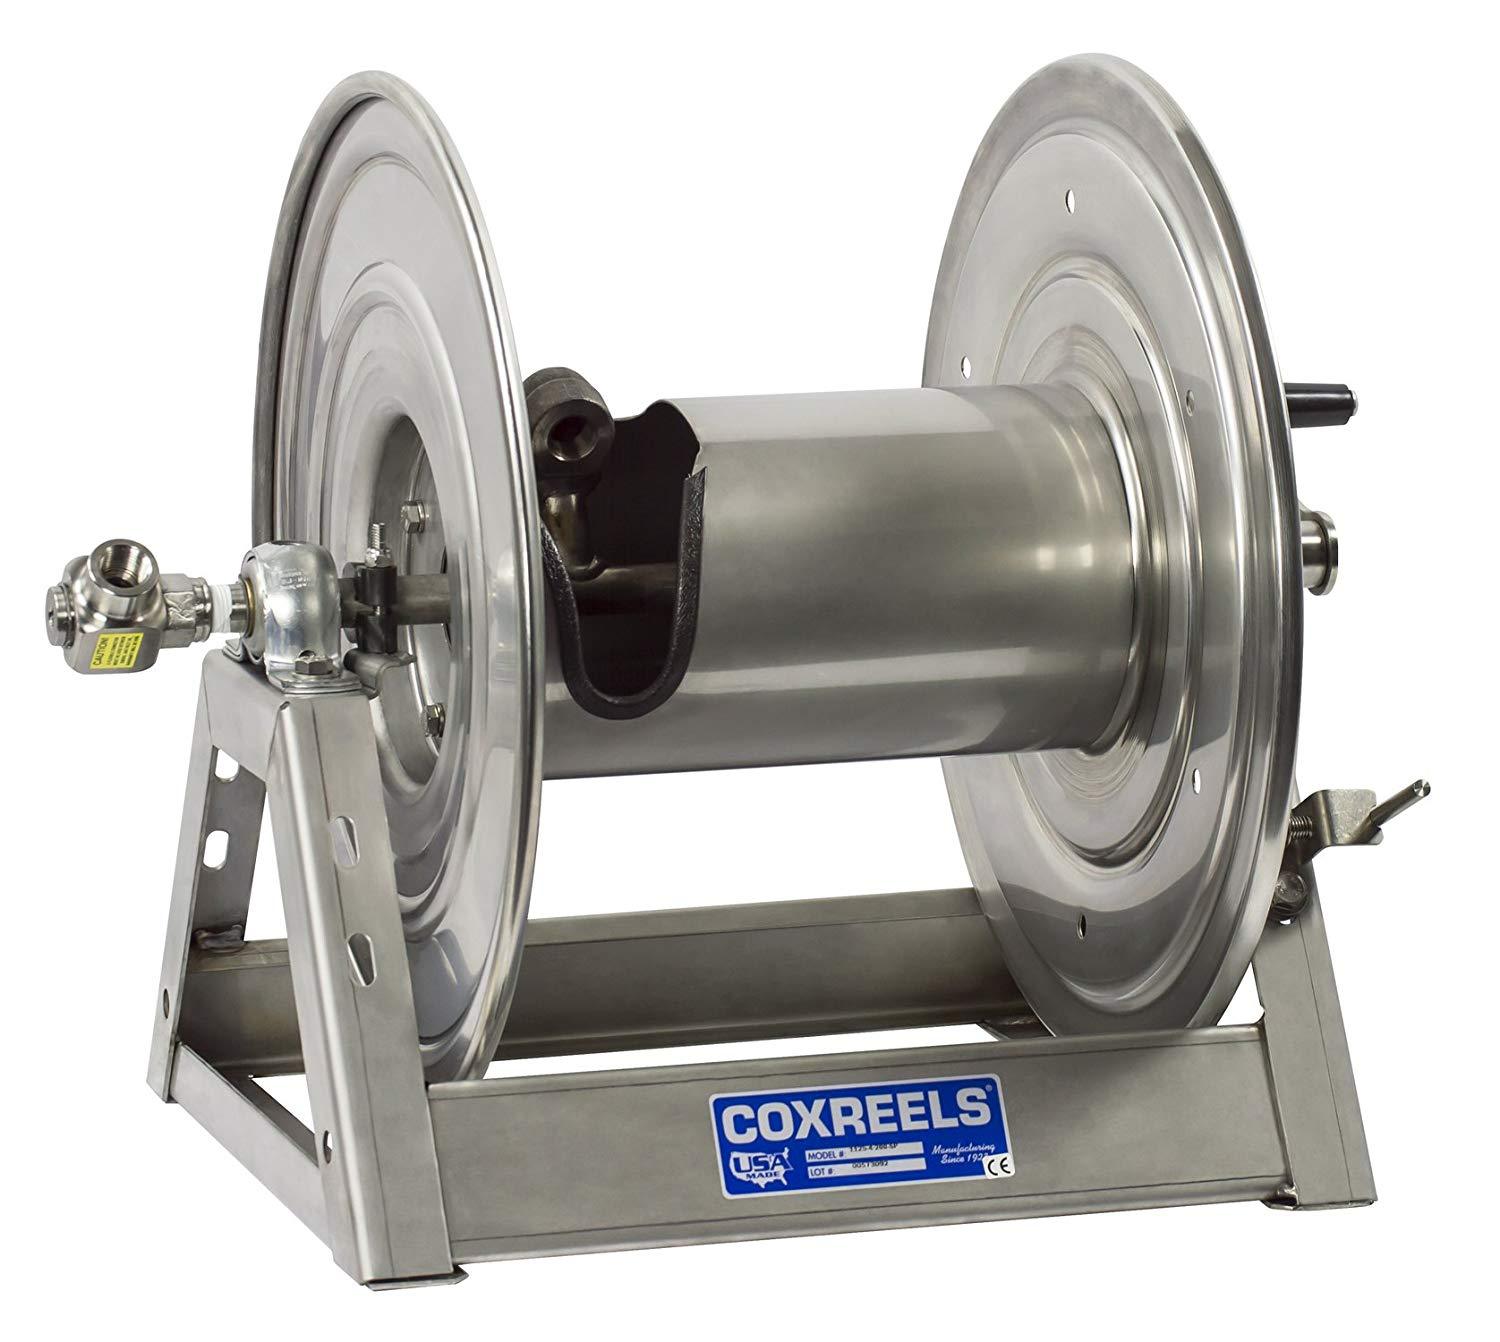 1125-4-200-SP : Coxreels 1125-4-200-SP Stainless Steel Hand Crank Hose  Reel, 1/2 ID, 200' capacity, NO HOSE, 3000psi